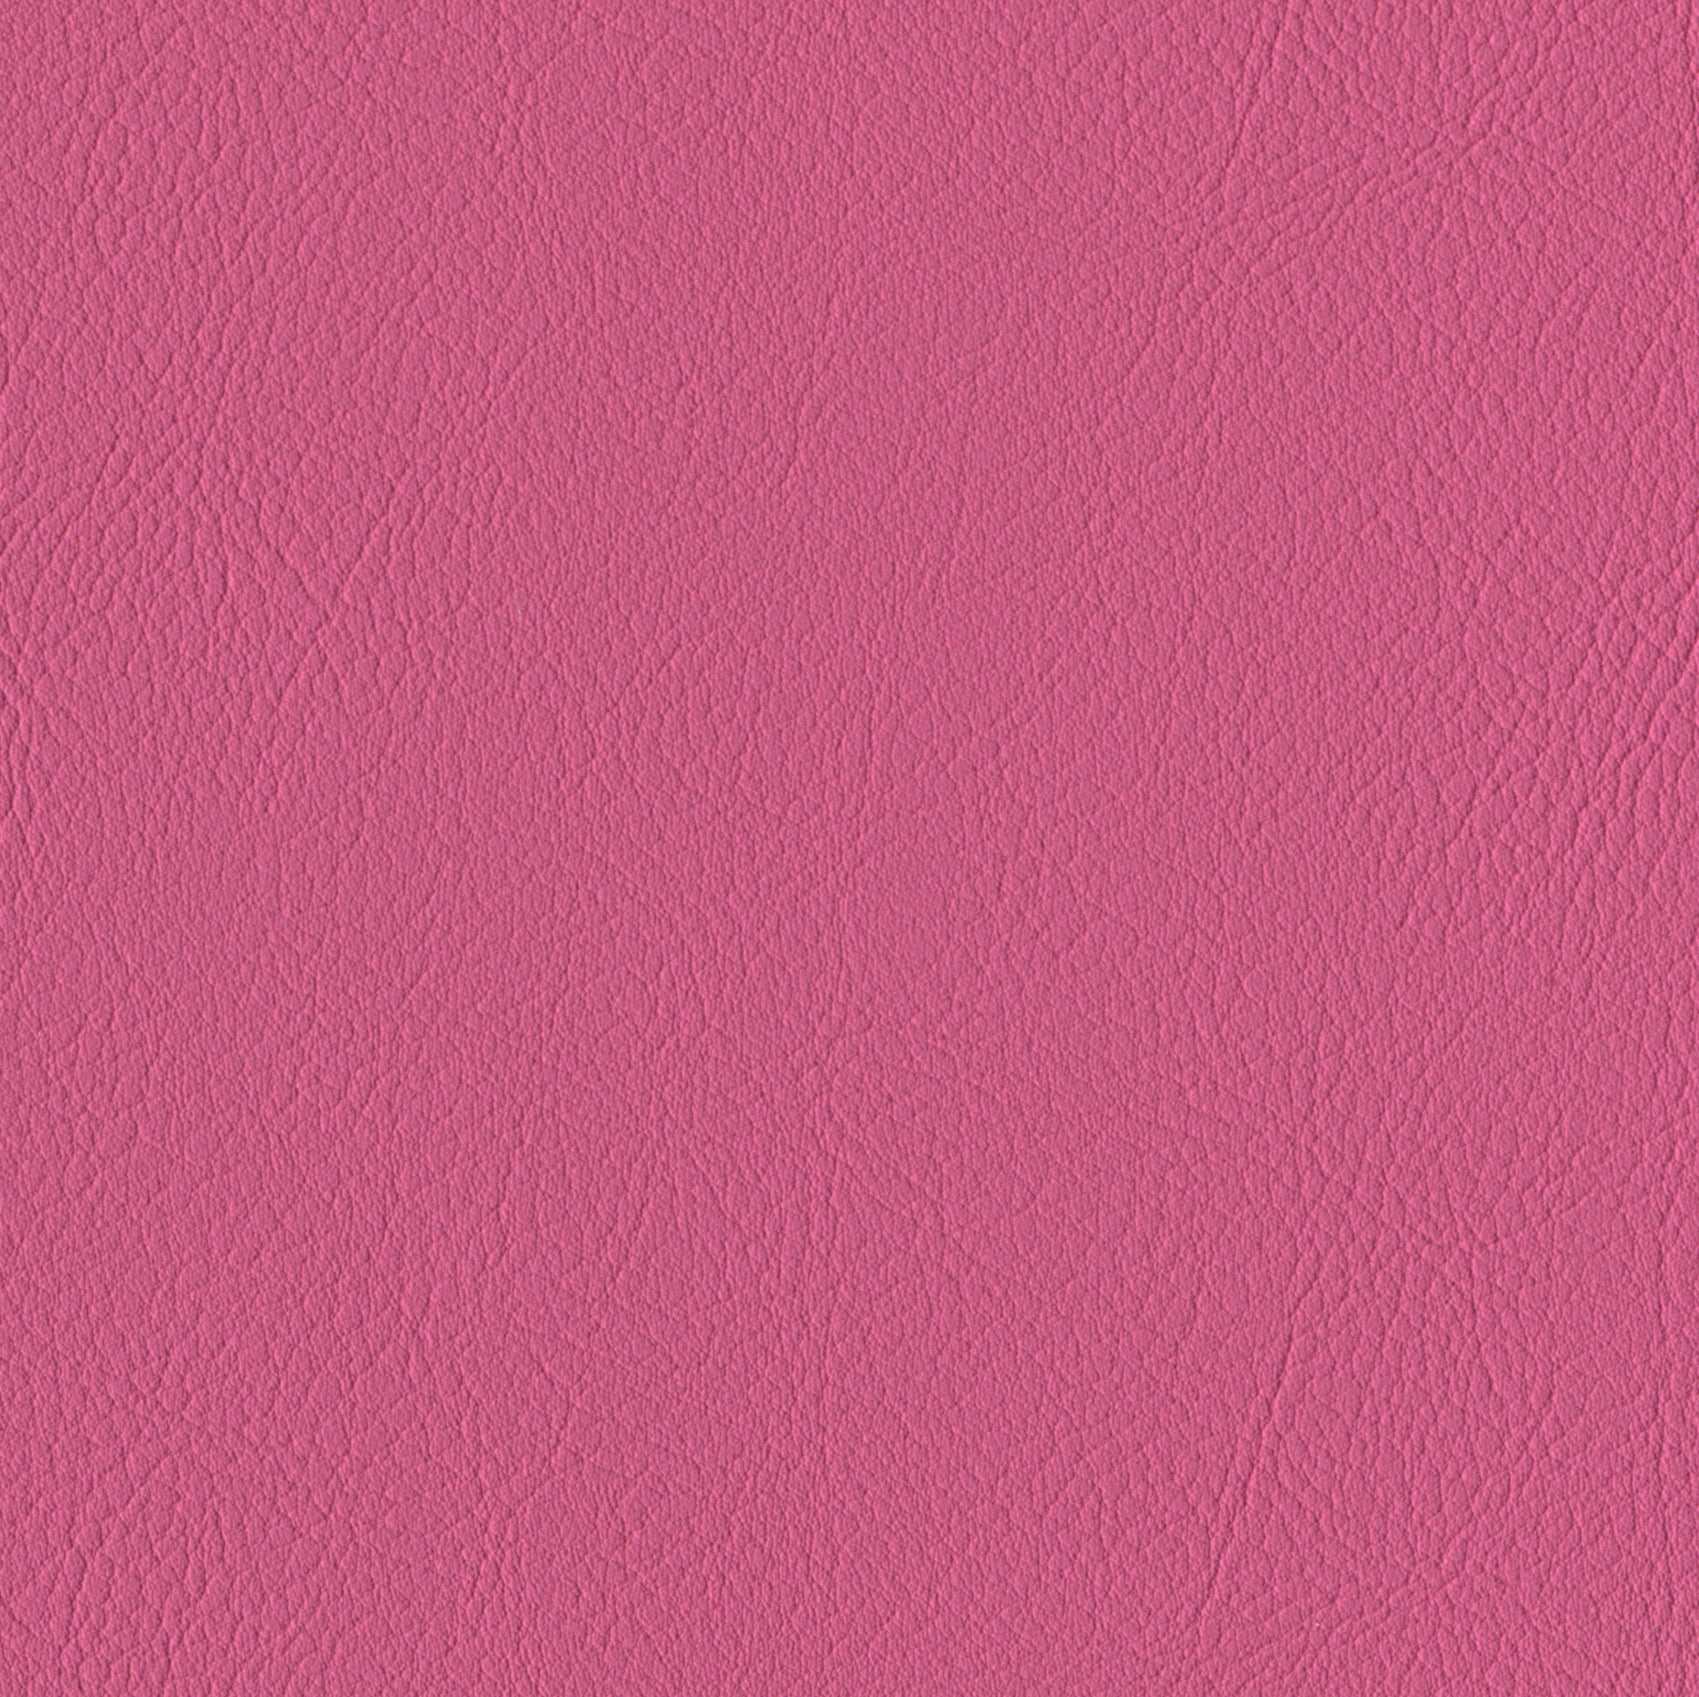    Andriali-Contract-Vinyl_Upholstery-Design-LegacyFR-Color-206Fusia-Width-140cm